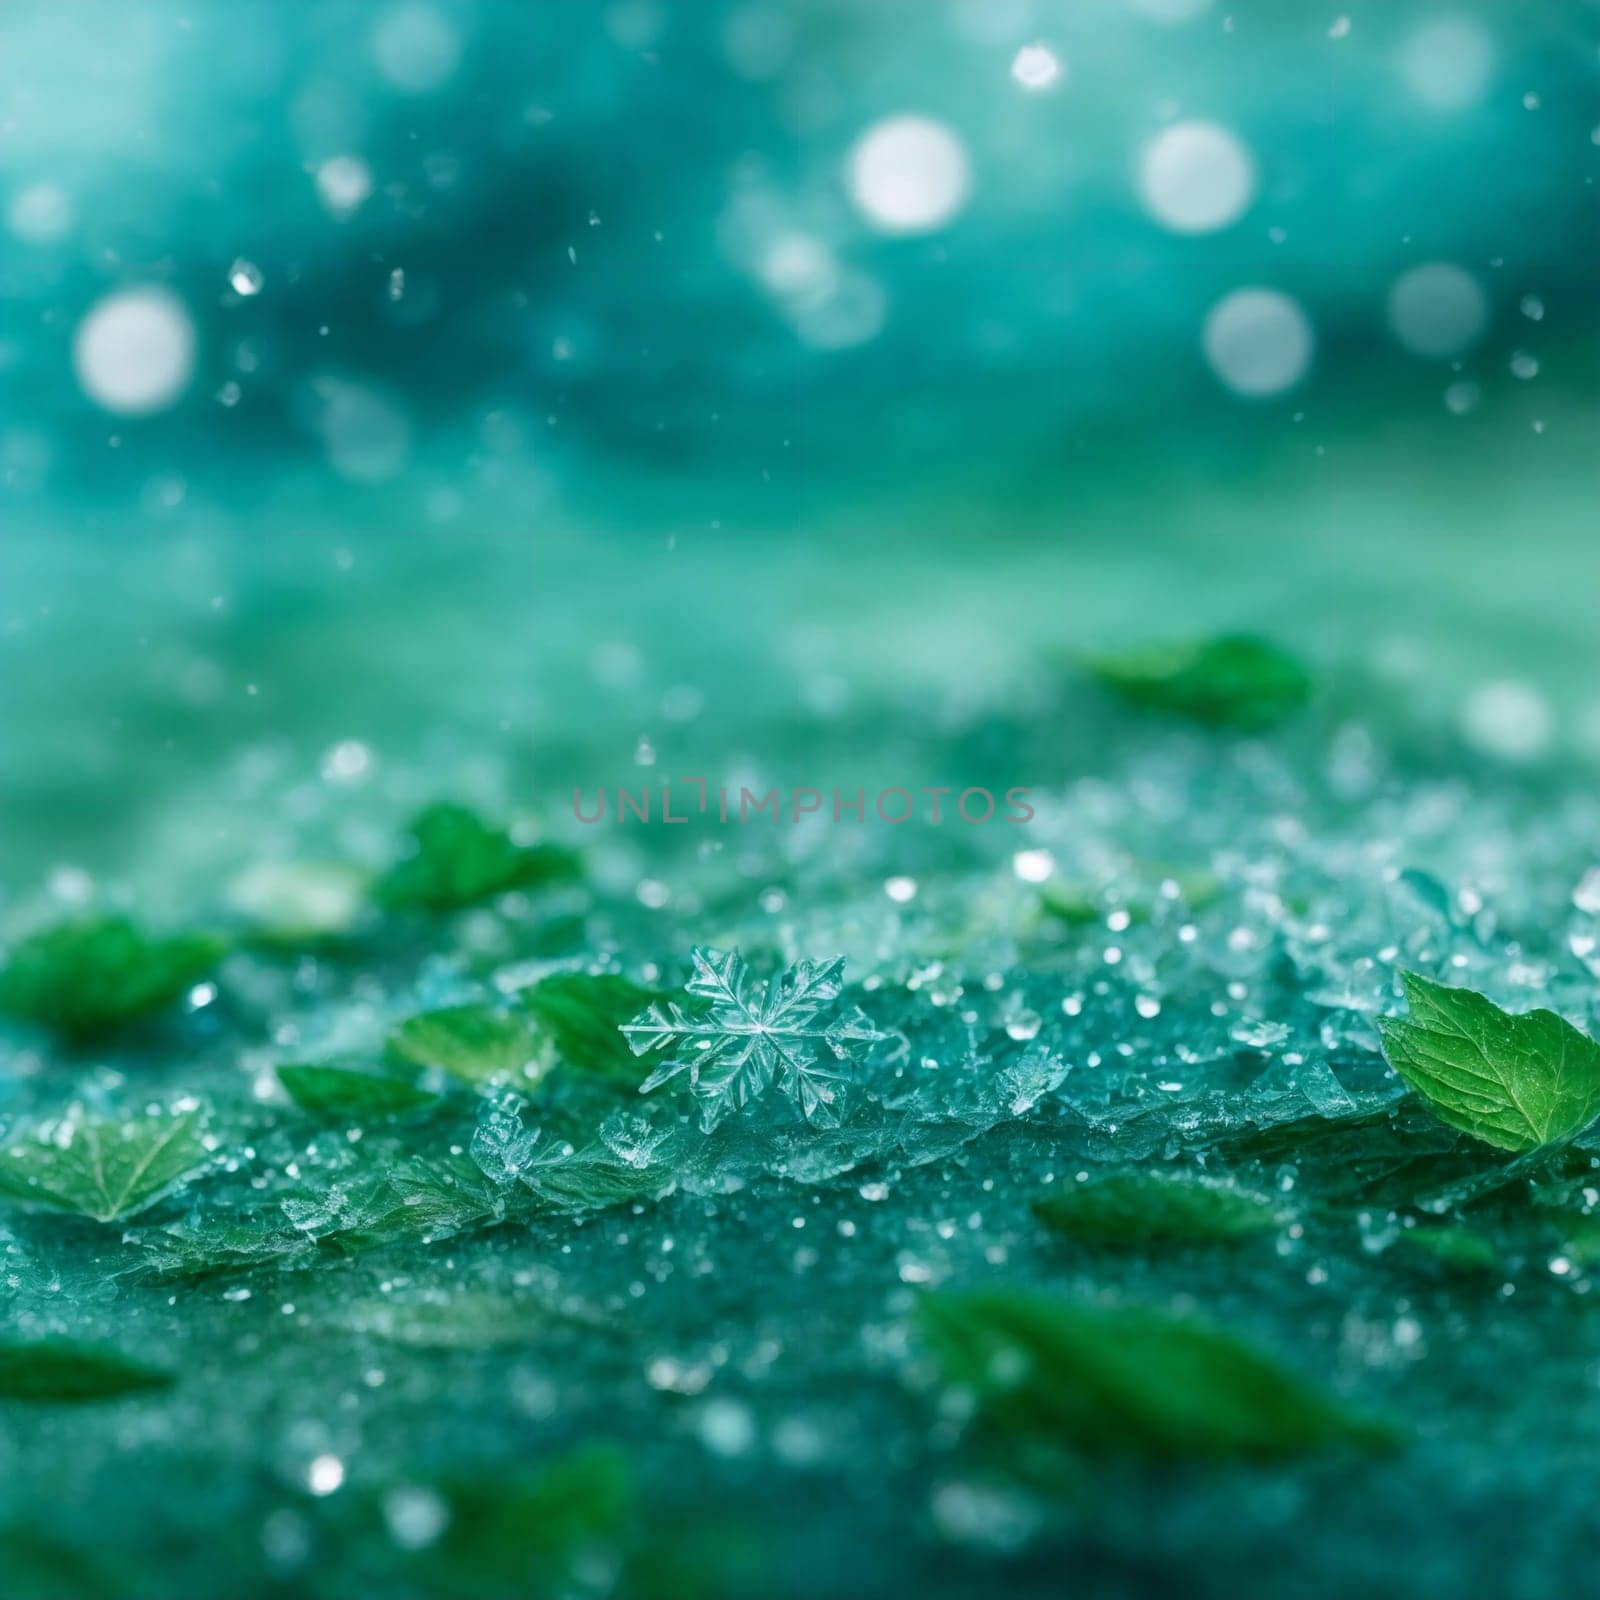 blue green bright abstract background with water drops and snowflakes of frozen ice